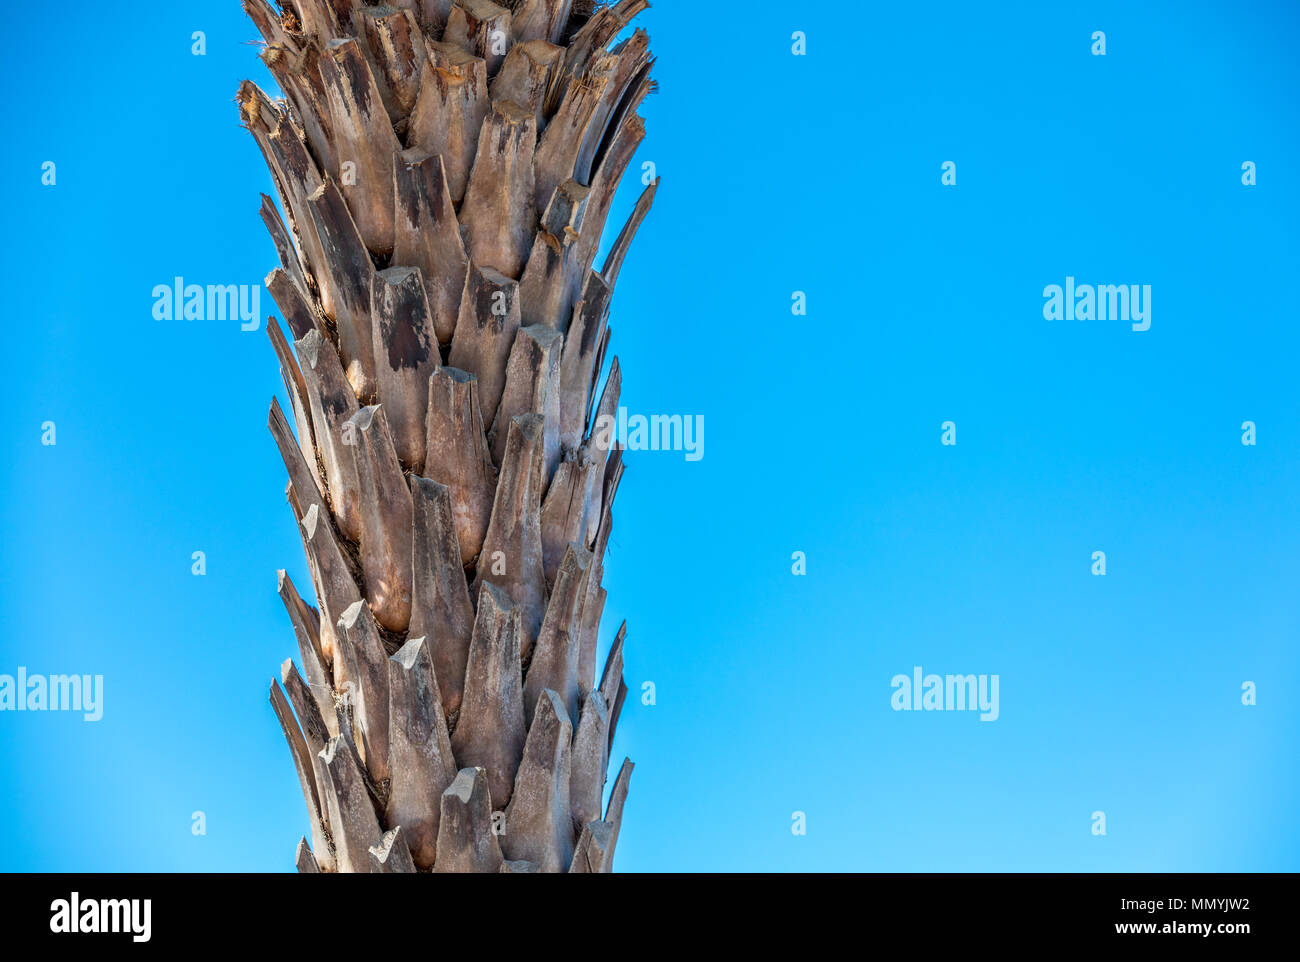 detail image of the trunk of a palm tree set against a brillant blue sky Stock Photo